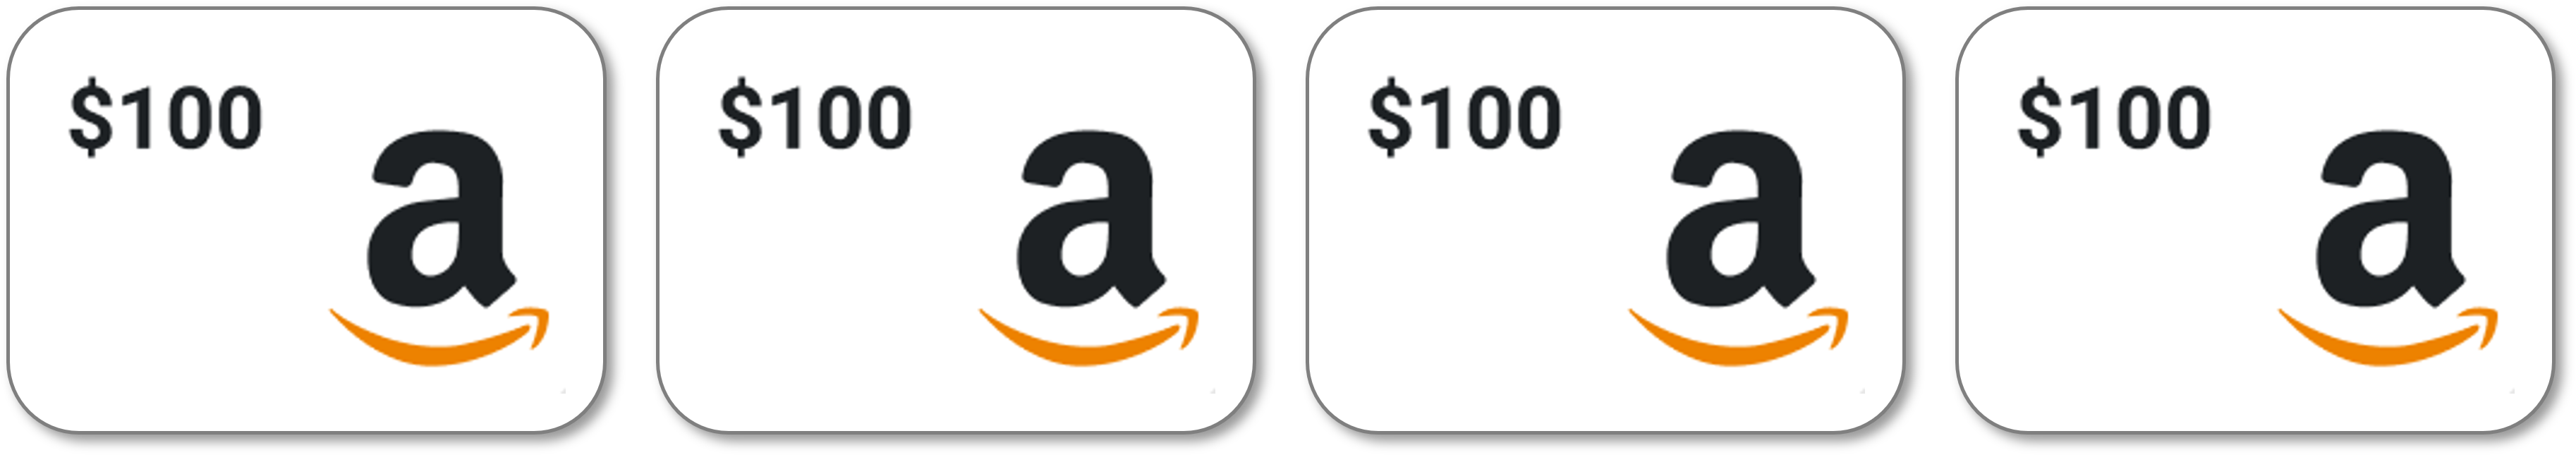 chance to win one of four Amazon gift cards